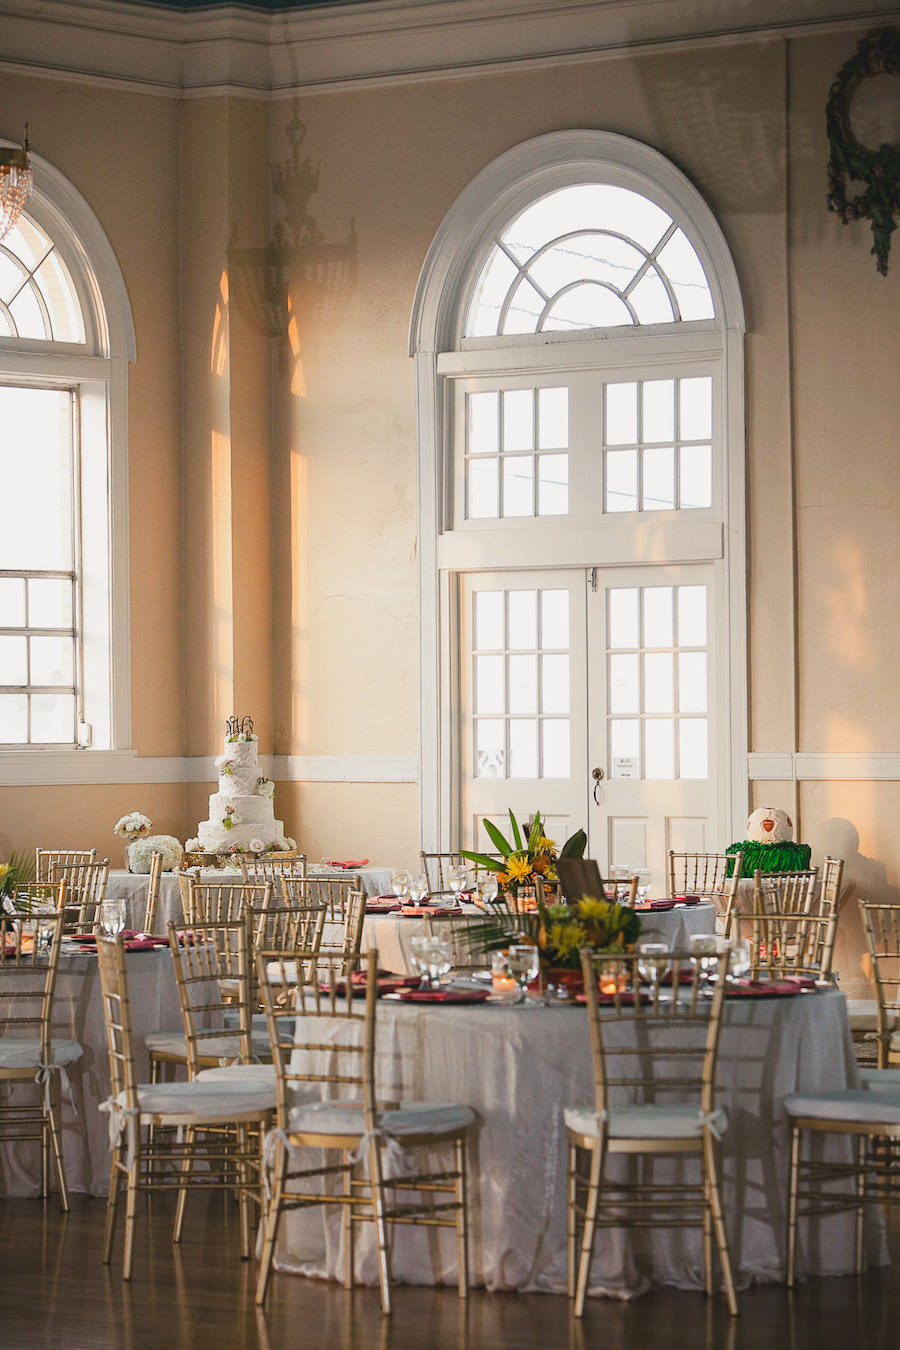 Indoor Ybor City Wedding Reception Decor with White Linens and Gold Chiavari Chairs | Tampa Wedding Venue The Cuban Club